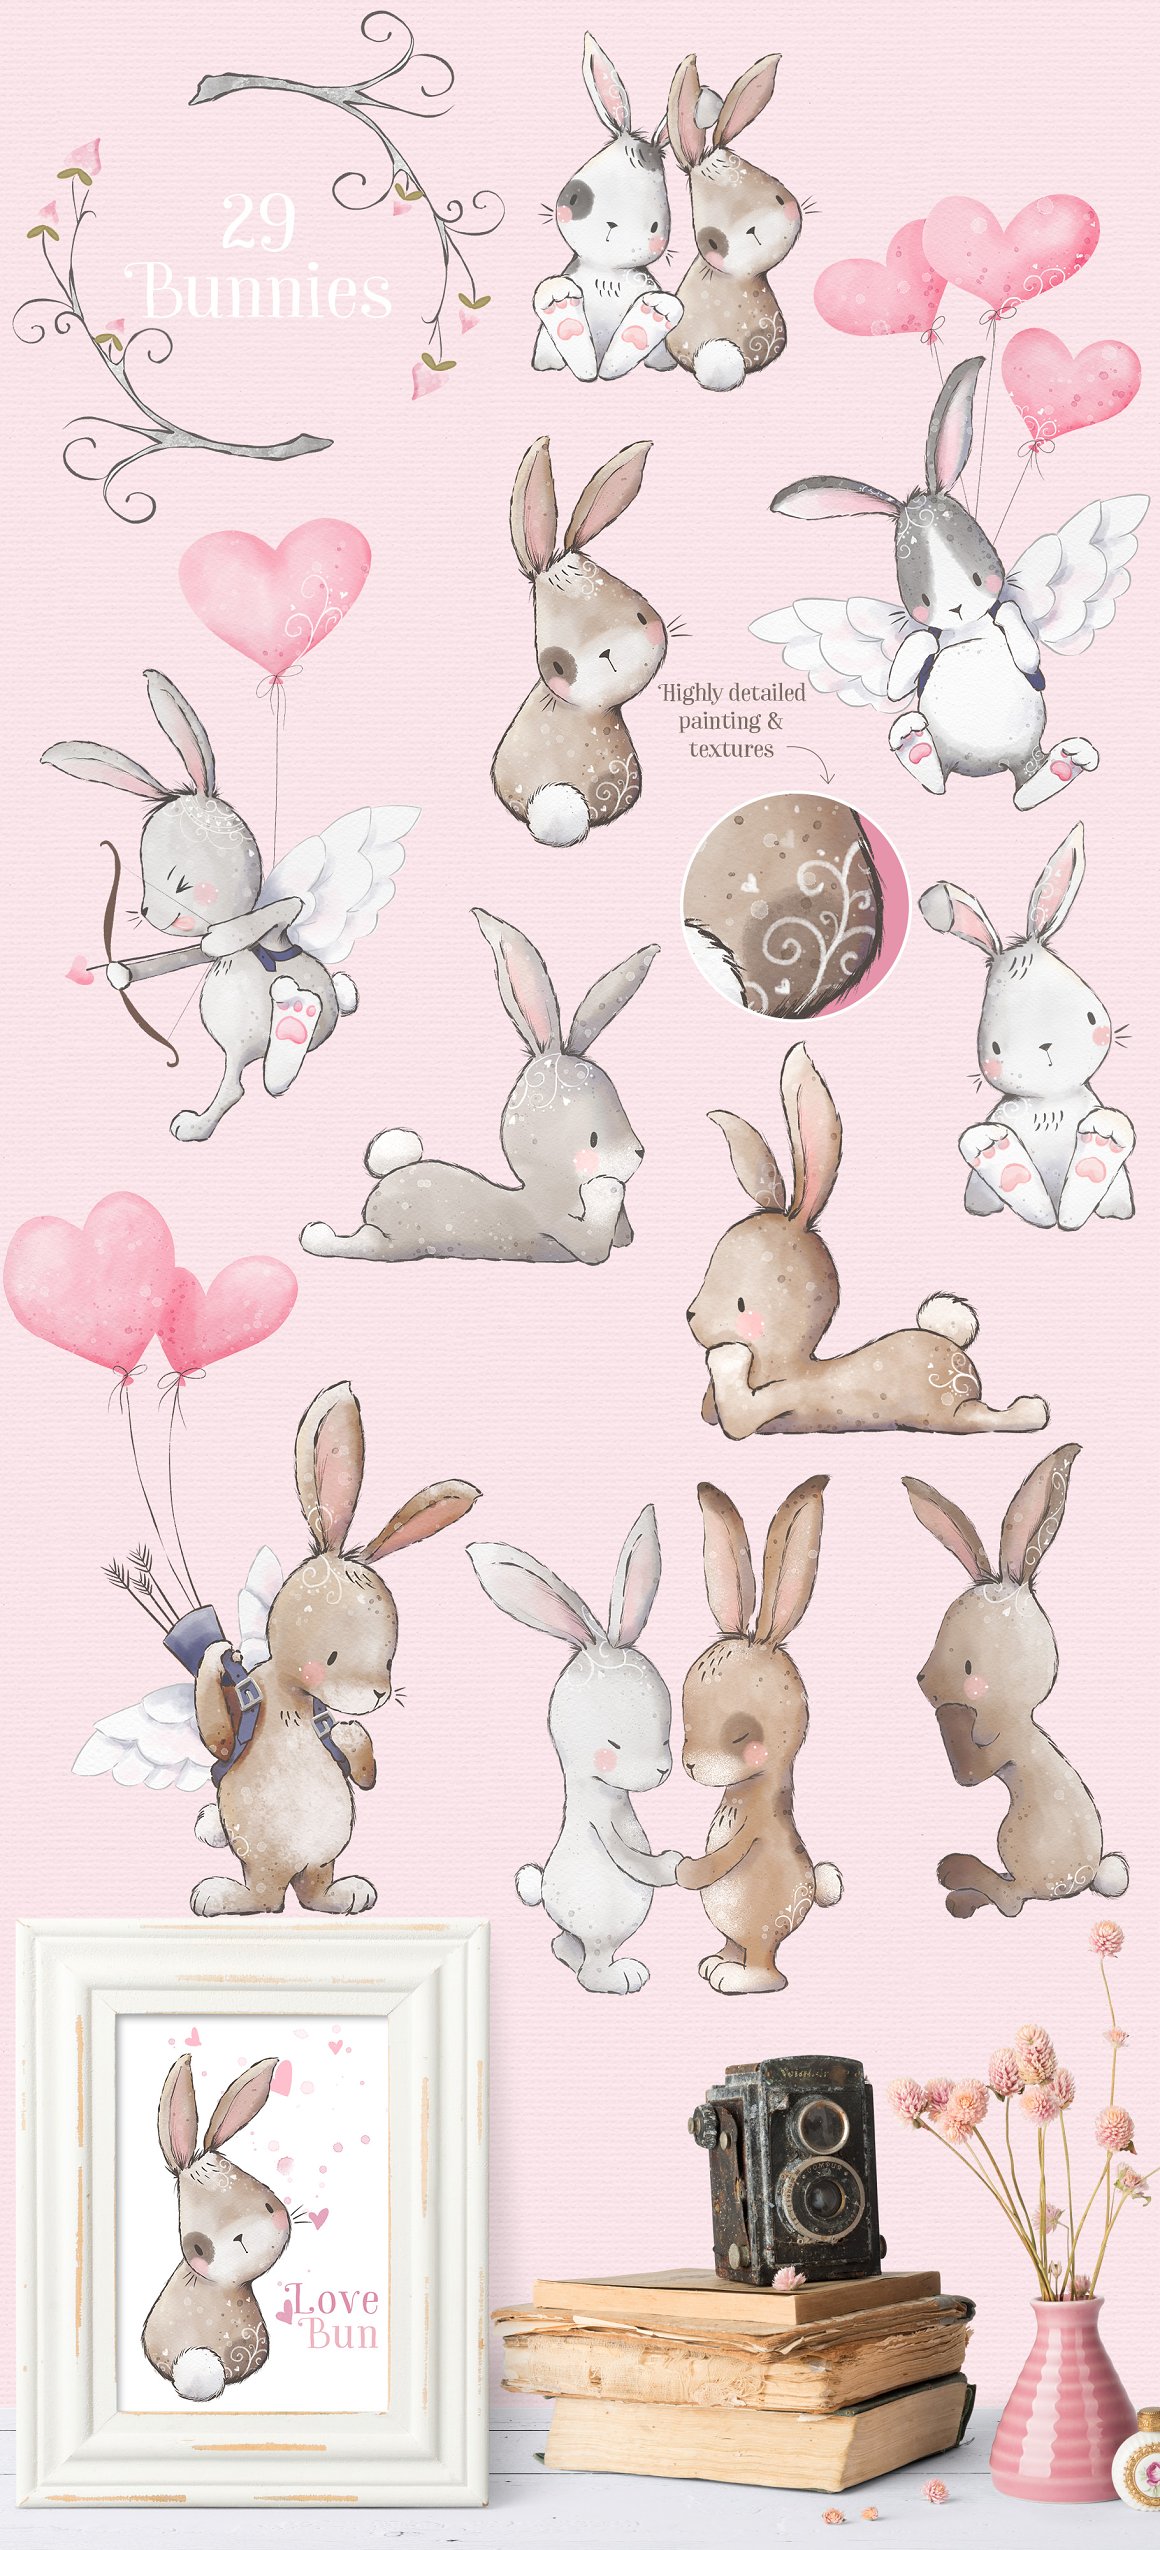 A set of 10 different illustrations of a bunny on a pink background.